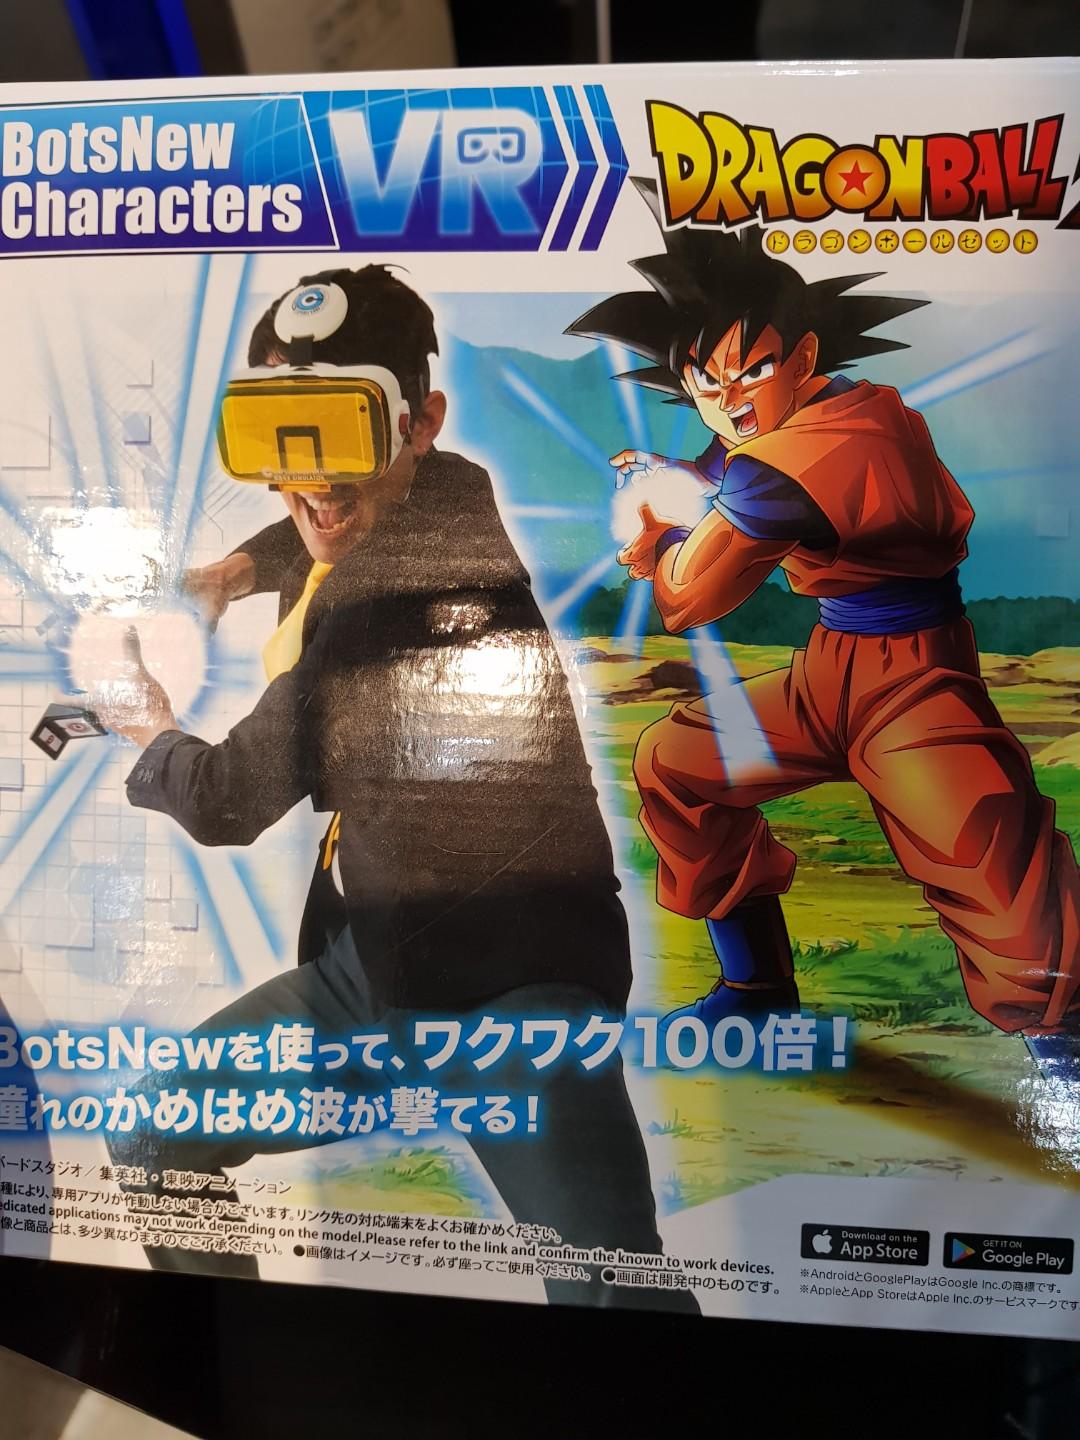 Botsnew Characters Vr Dragonball Z Toys Games Video Gaming Video Games On Carousell